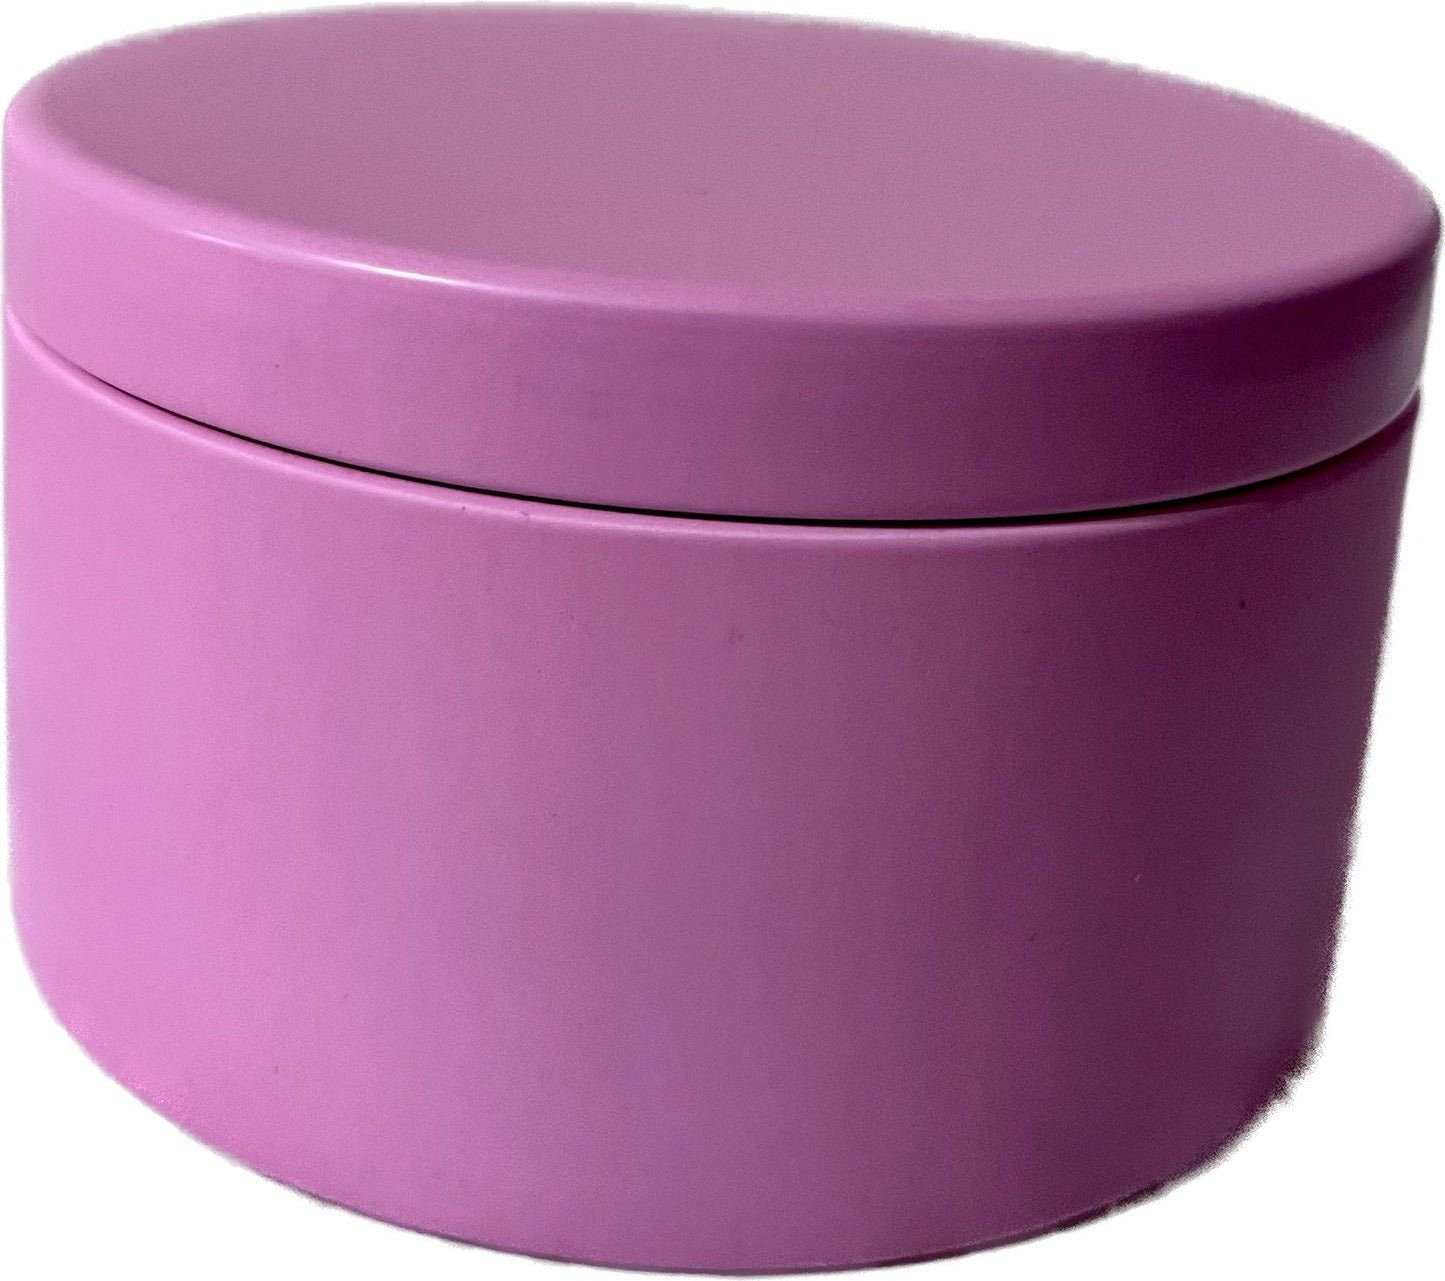 Just Breathe, Lavender Scented Candle